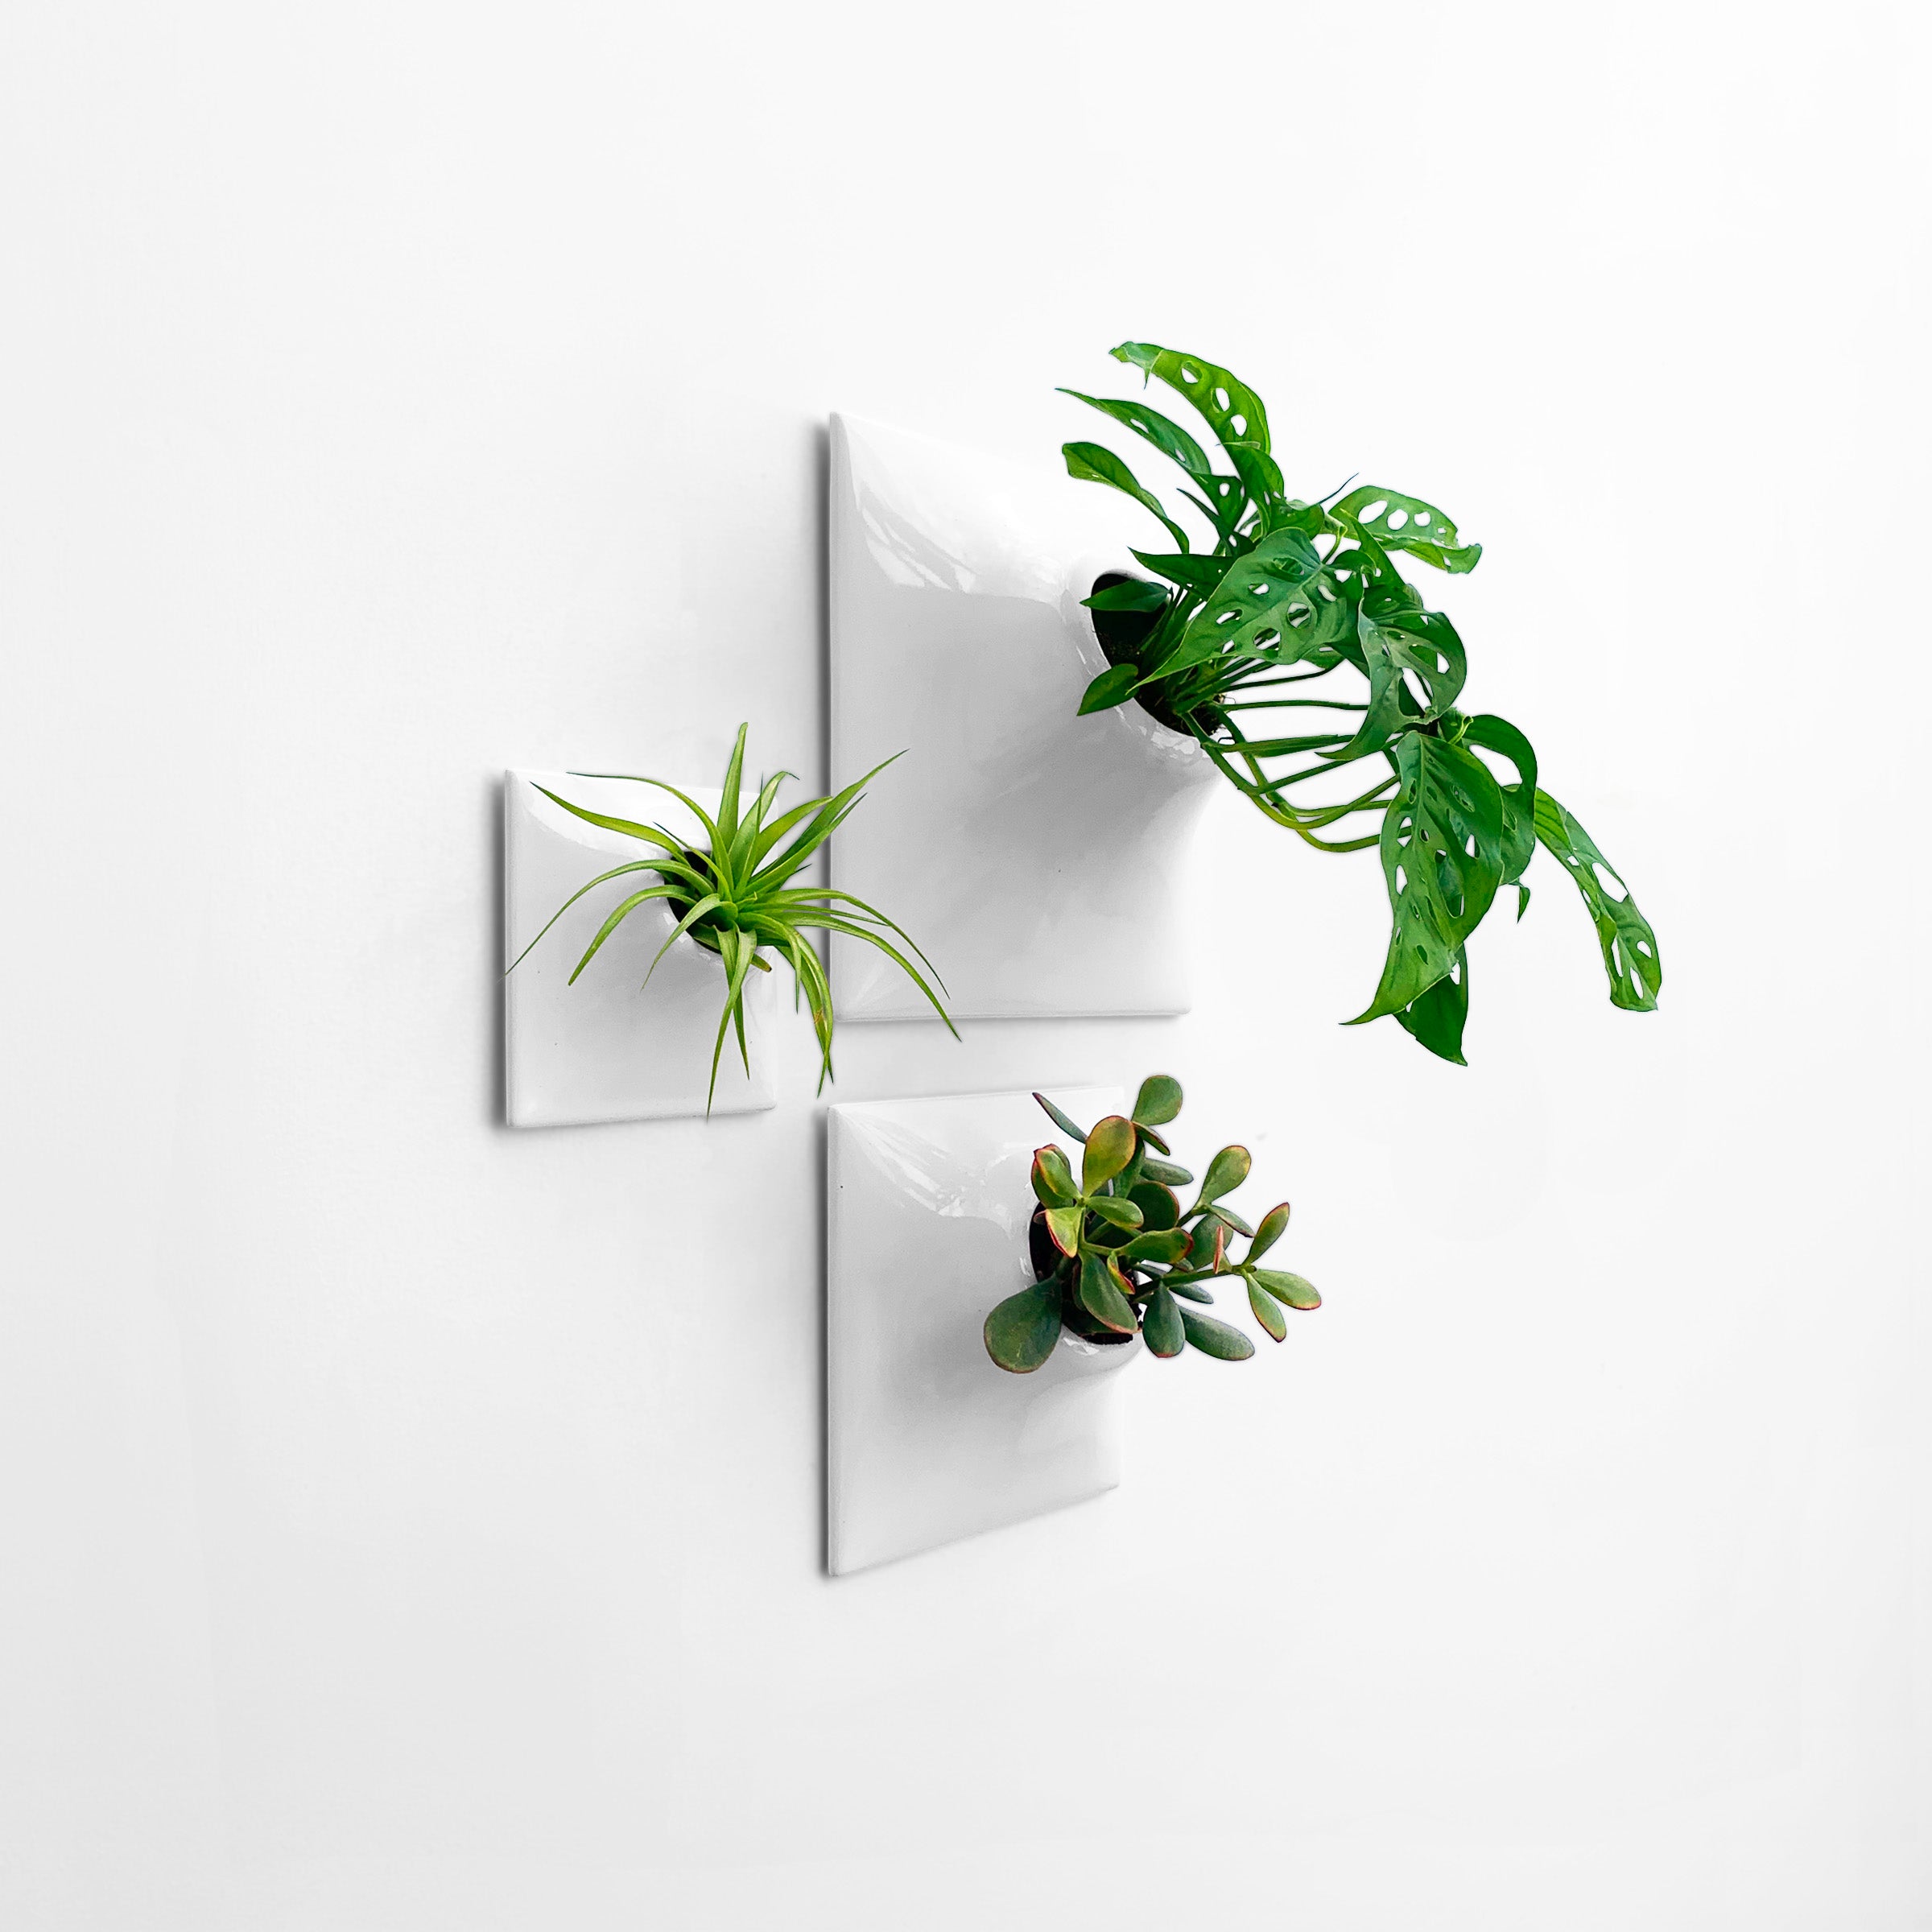 EVEAGE 36 in. x 15.7 in. White Glass Wall Hanging Planter 3 Tiered